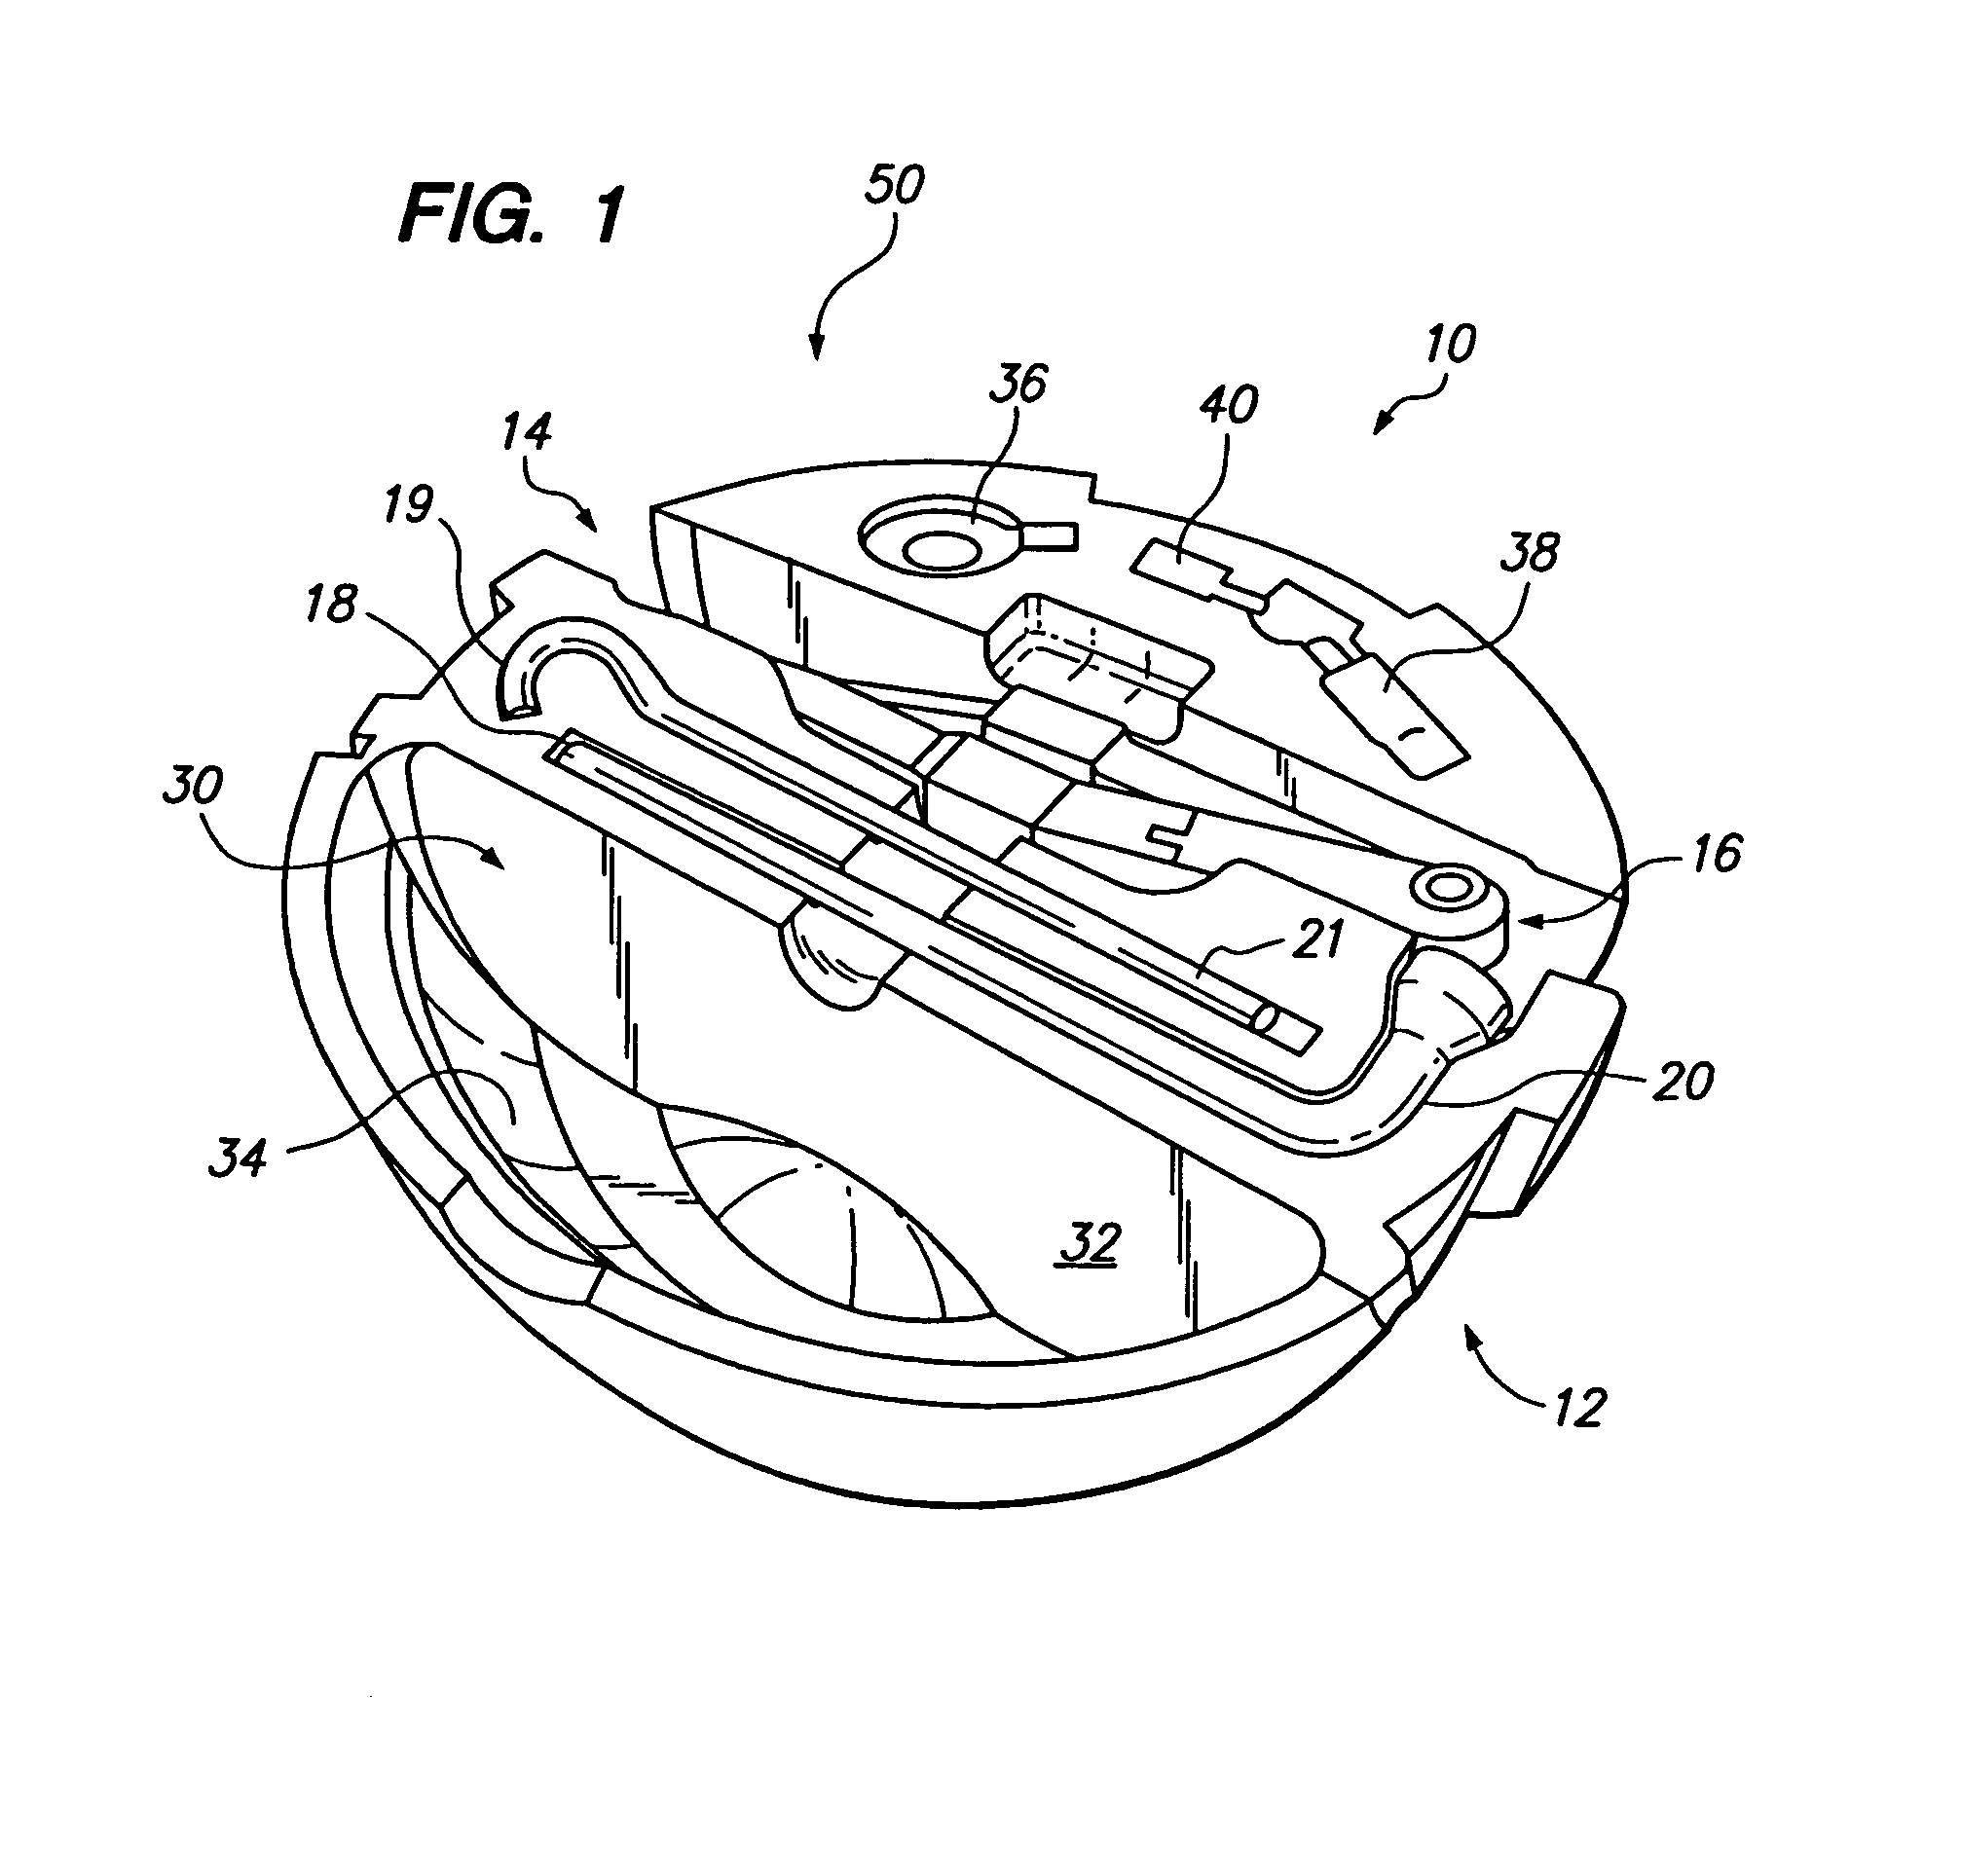 Apparatus for compactly storing tools and accessories together with a spare wheel, and tool kit incorporating same